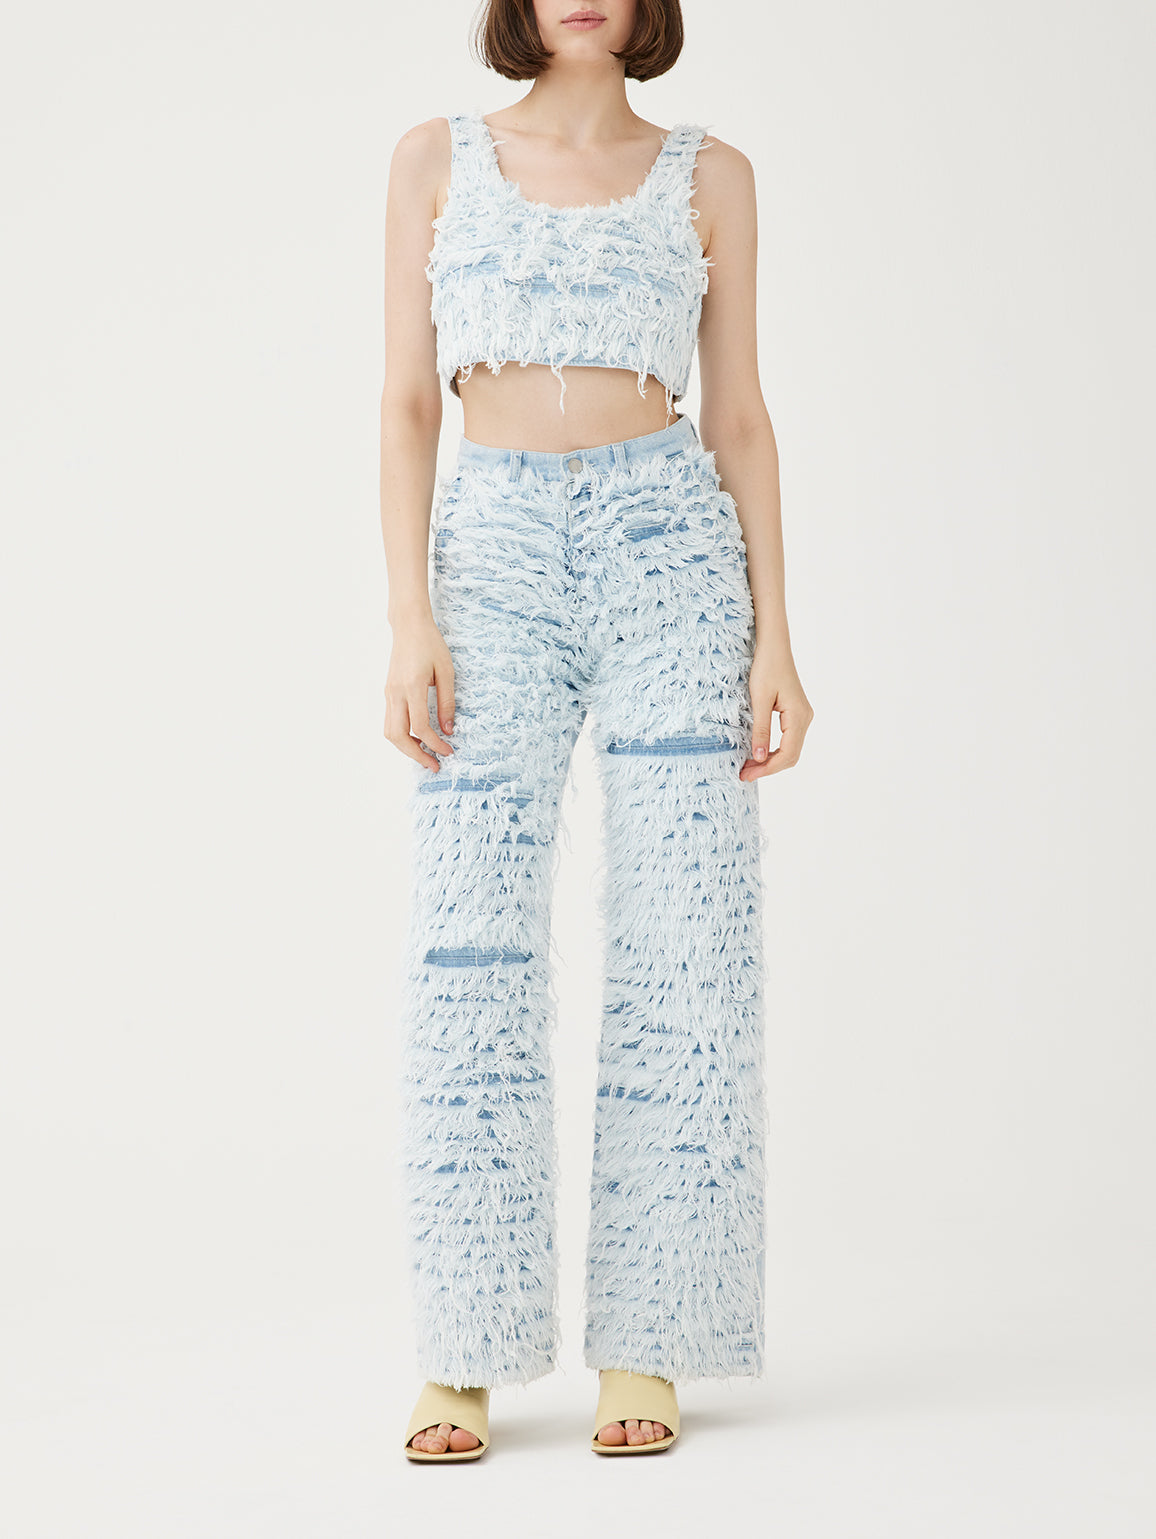 Eco Patchwork Relaxed Tapered Cropped Jeans